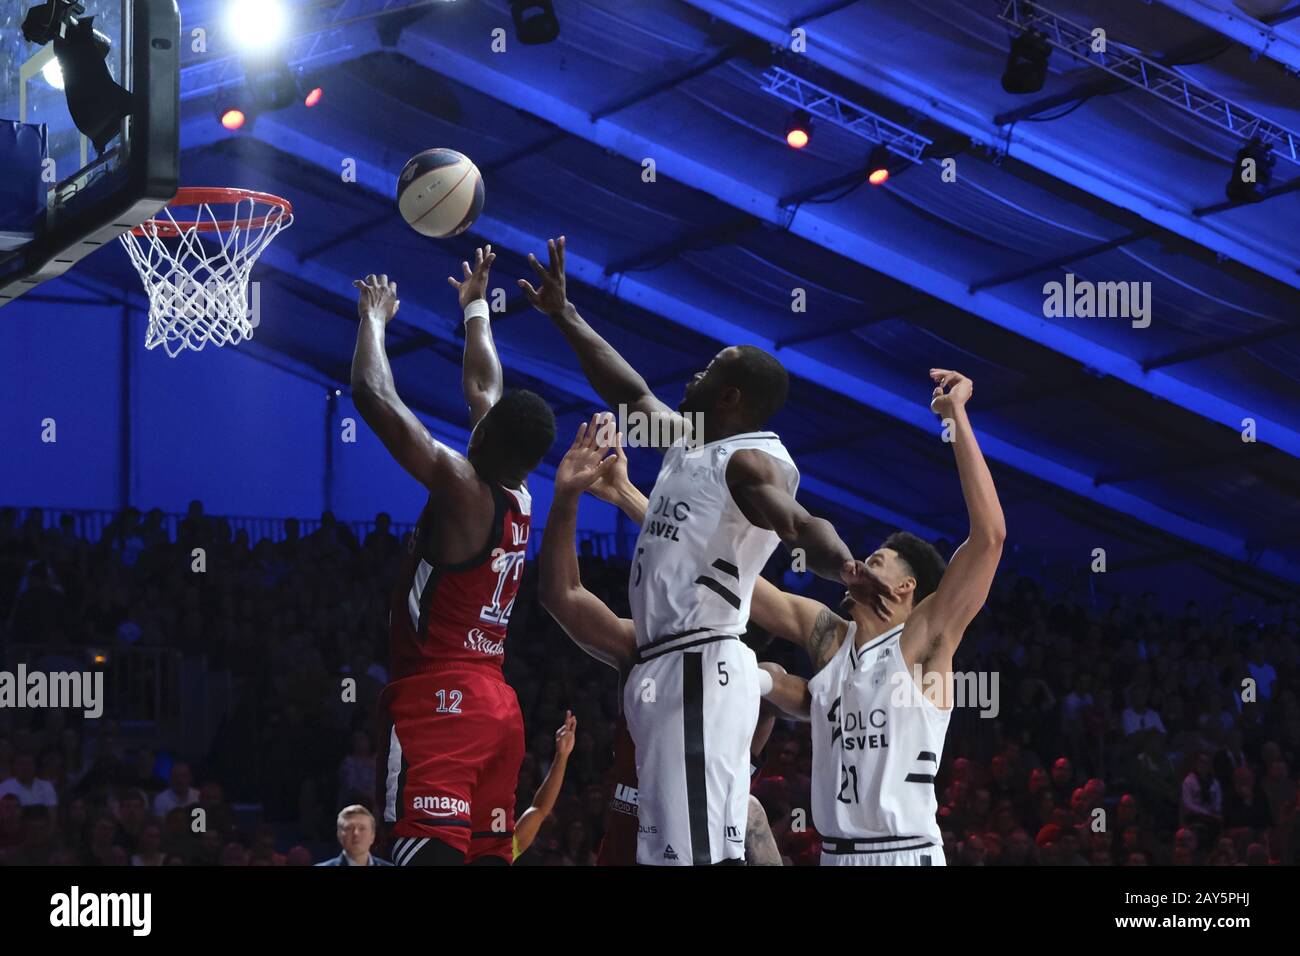 Marne La Vallee, Seine et Marne, France. 14th Feb, 2020. ASVEL player KAHUDI CHARLES in action during the LNB Basket Leaders Cup quarterfinal ASVEL against Strasbourg at the Disney Events Arena in Paris - France.ASVEL won 91-72 Credit: Pierre Stevenin/ZUMA Wire/Alamy Live News Stock Photo